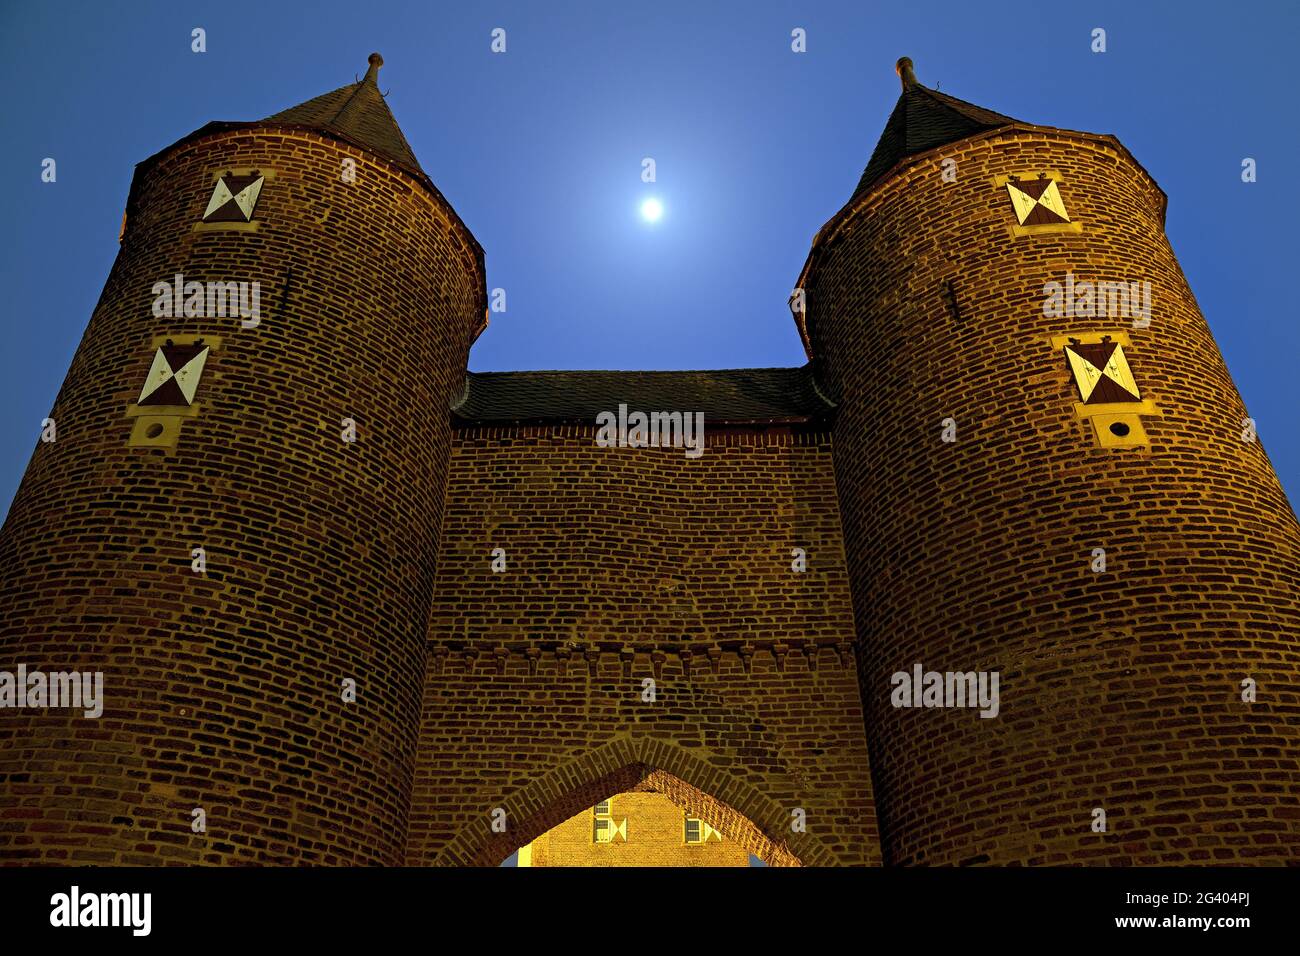 Klever Tor in the evening with a full moon, Xanten, North Rhine-Westphalia, Germany, Europe Stock Photo